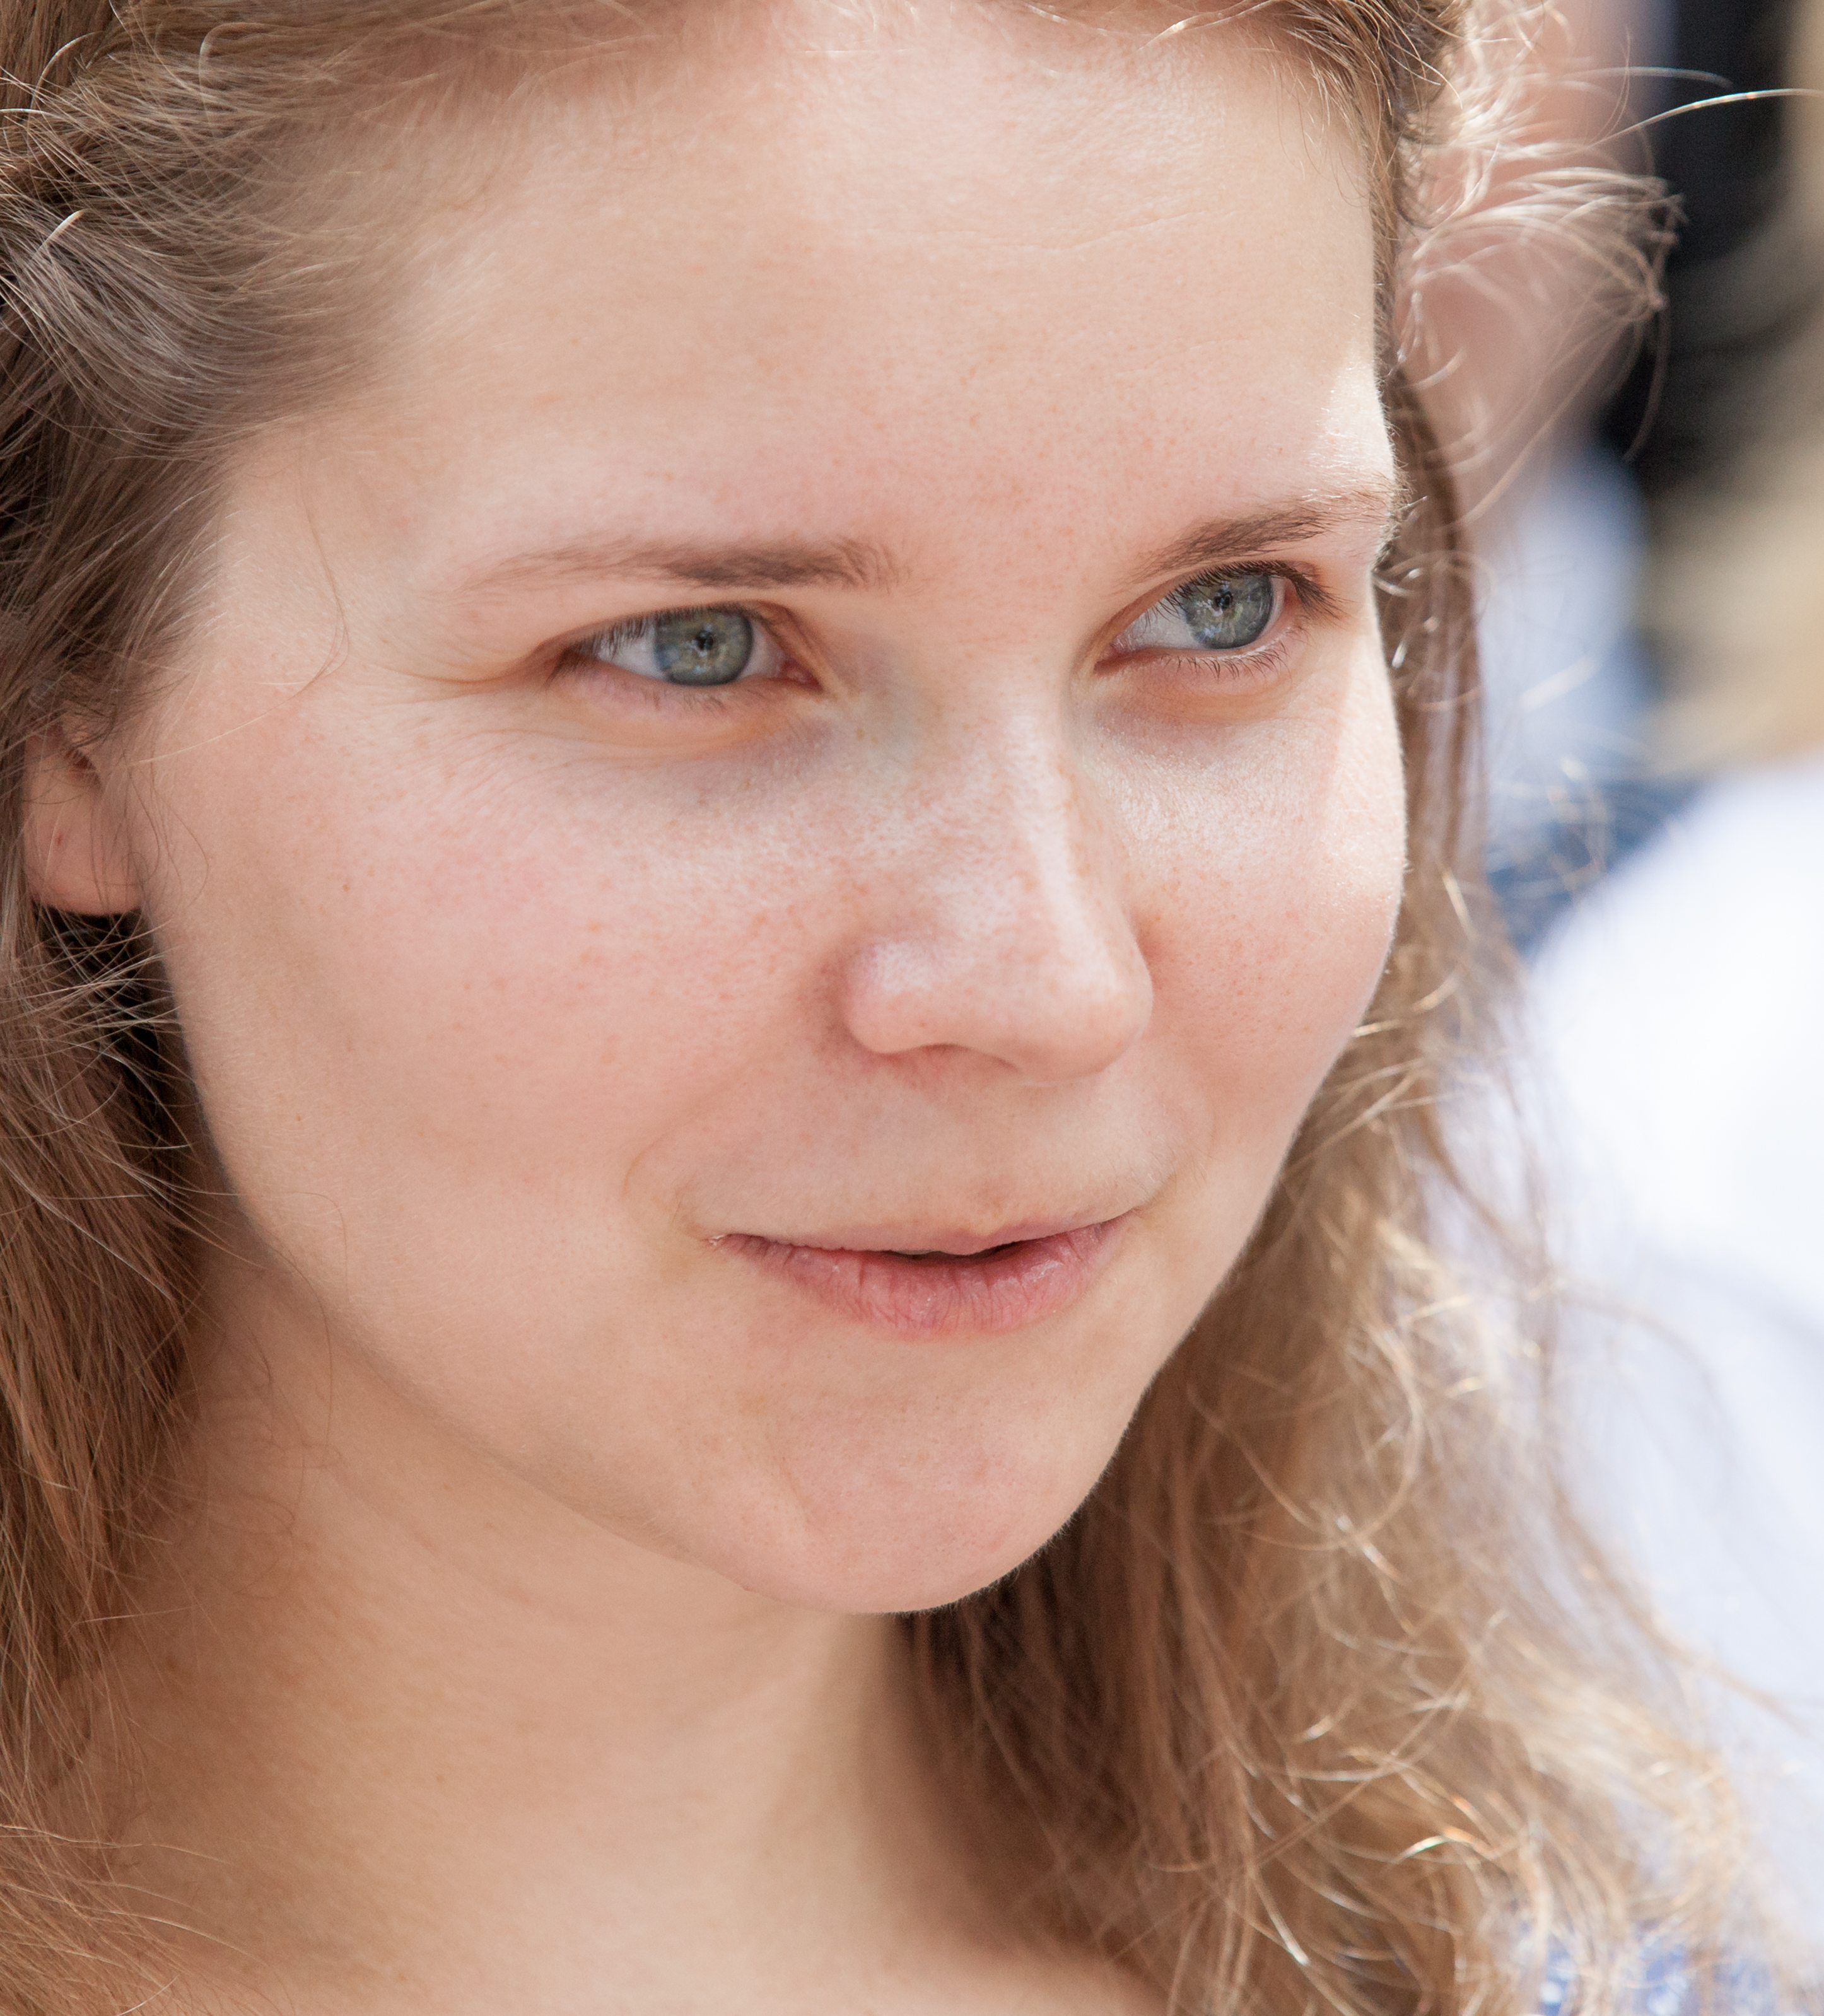 a Christian girl photographed in Medjugorje, Bosnia in July 2014, picture 8